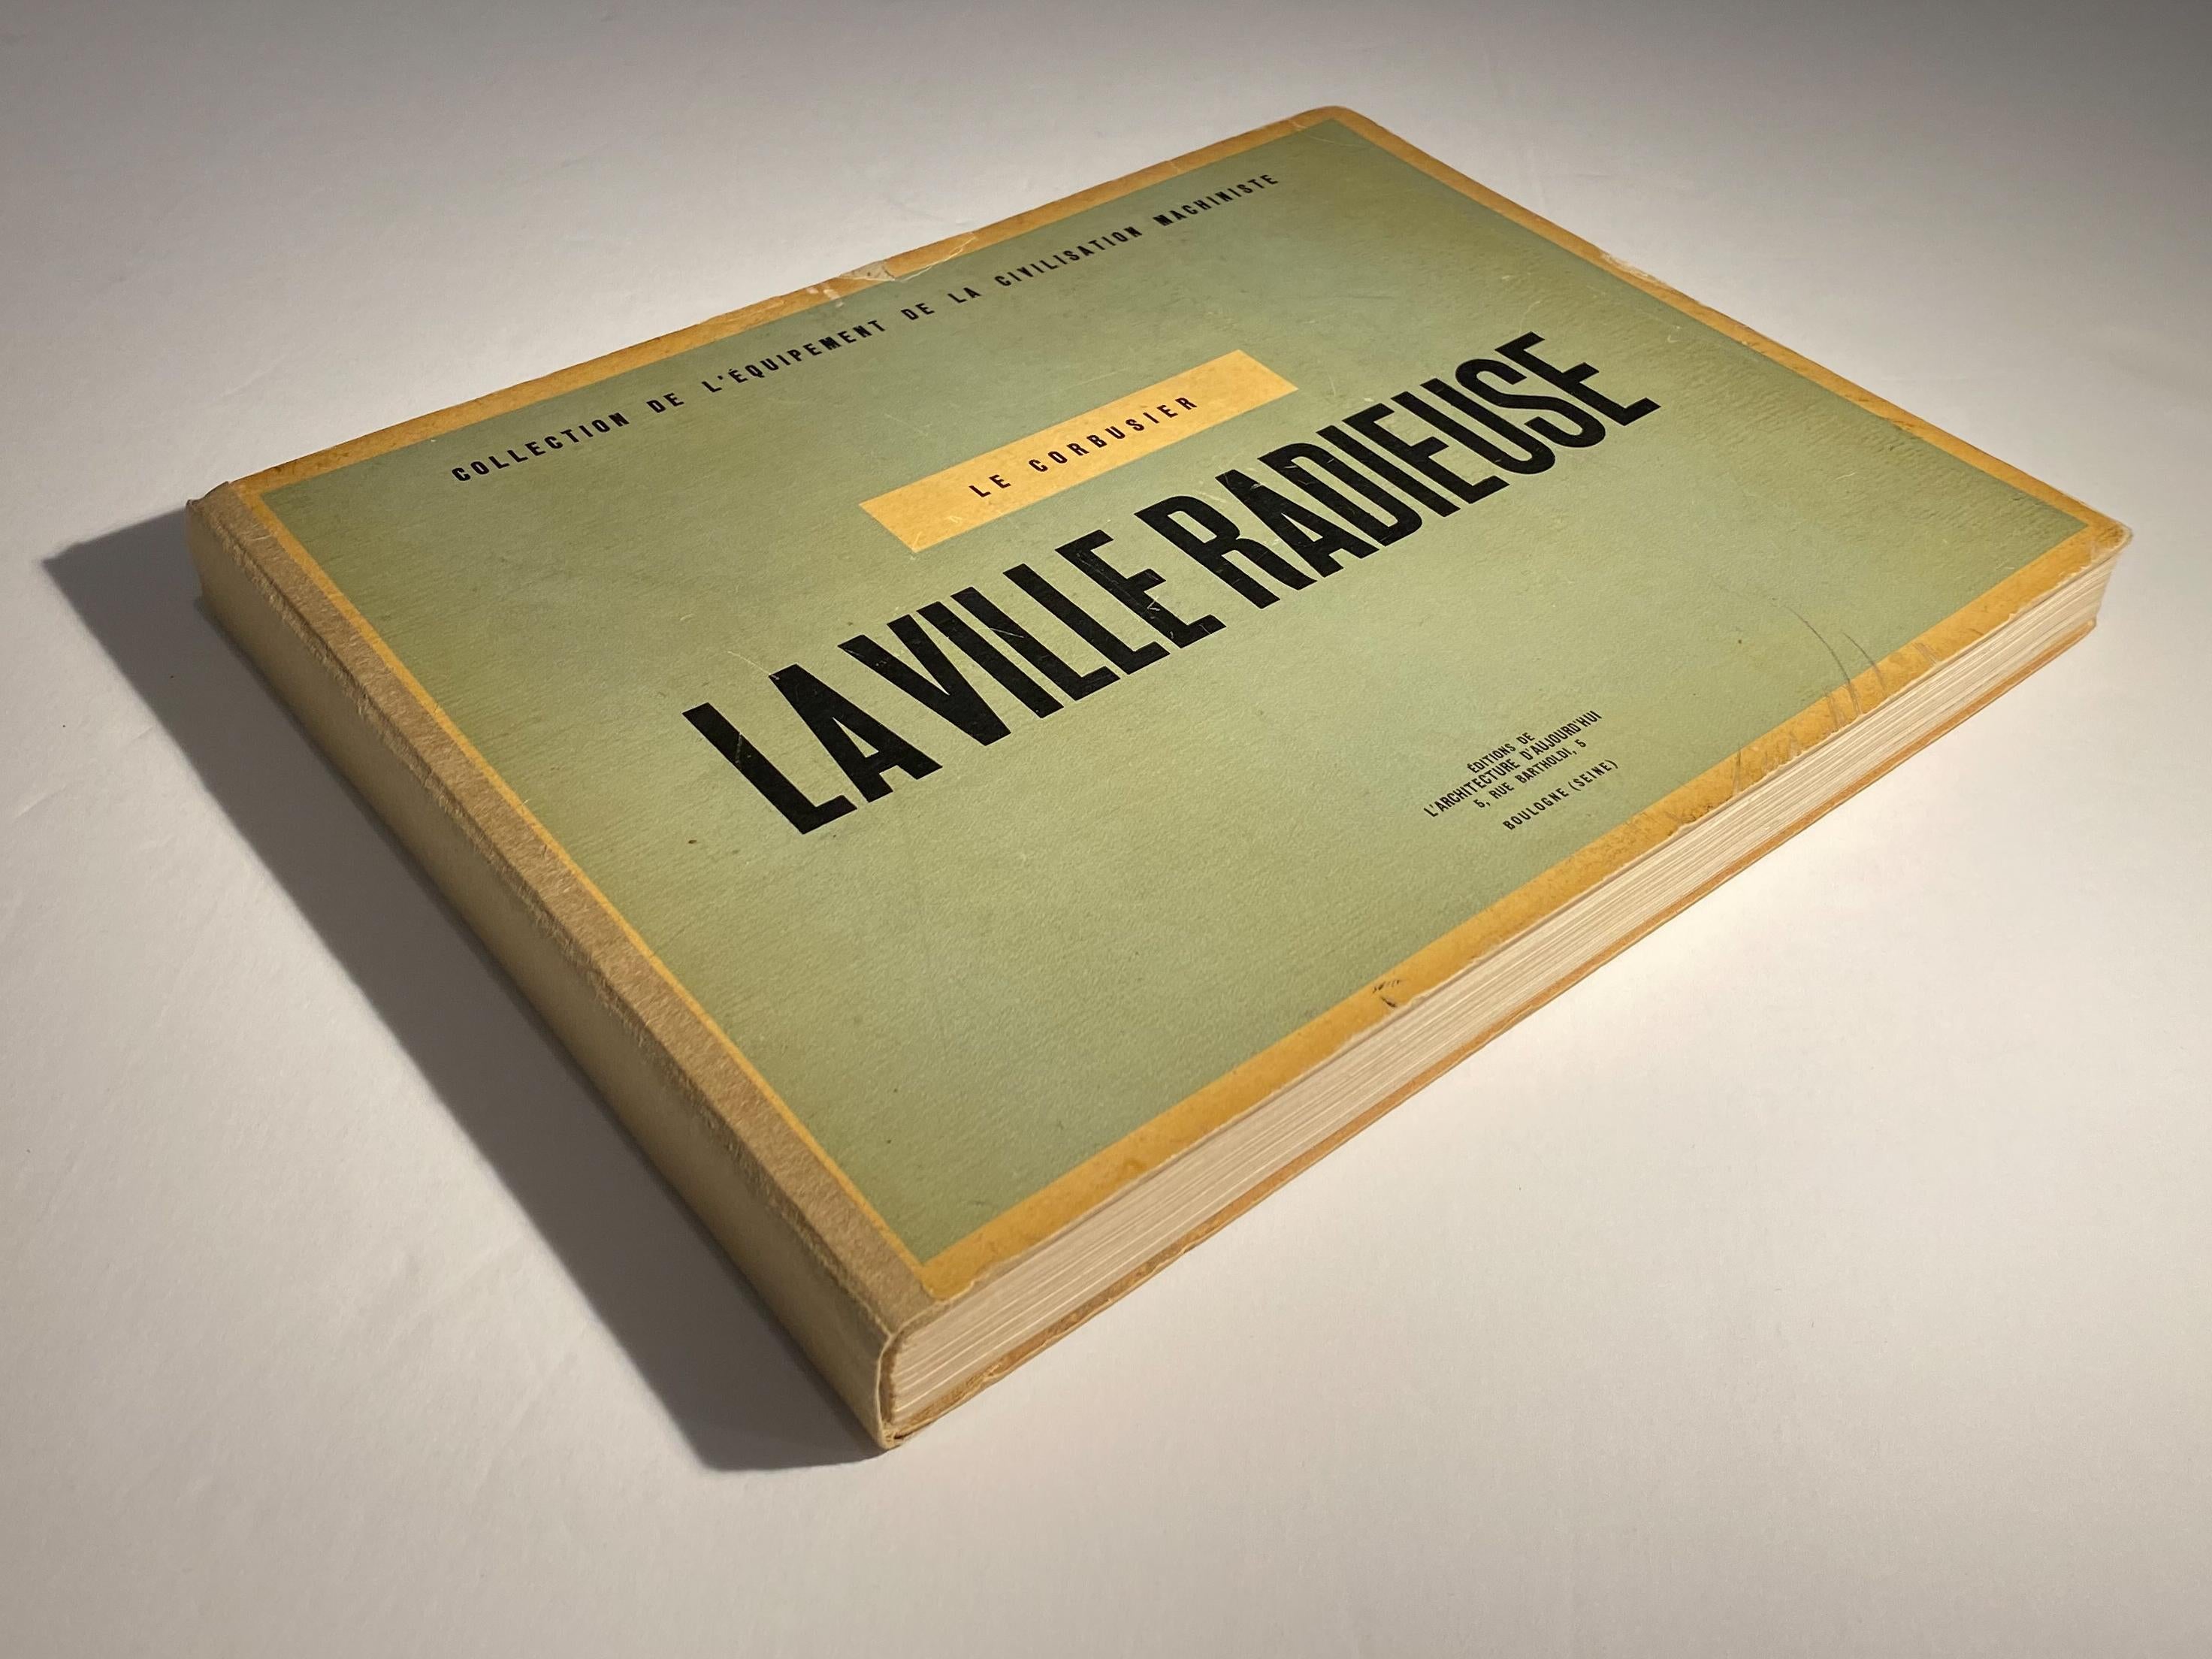 Hardcover first edition of Le Corbusier's seminal La Ville Radieuse (The Radiant City), published by the celebrated review L'Architecture D'Aujourd'hui. A rare volume, made more so by a warm full-page inscription in the year of publication (1935) by